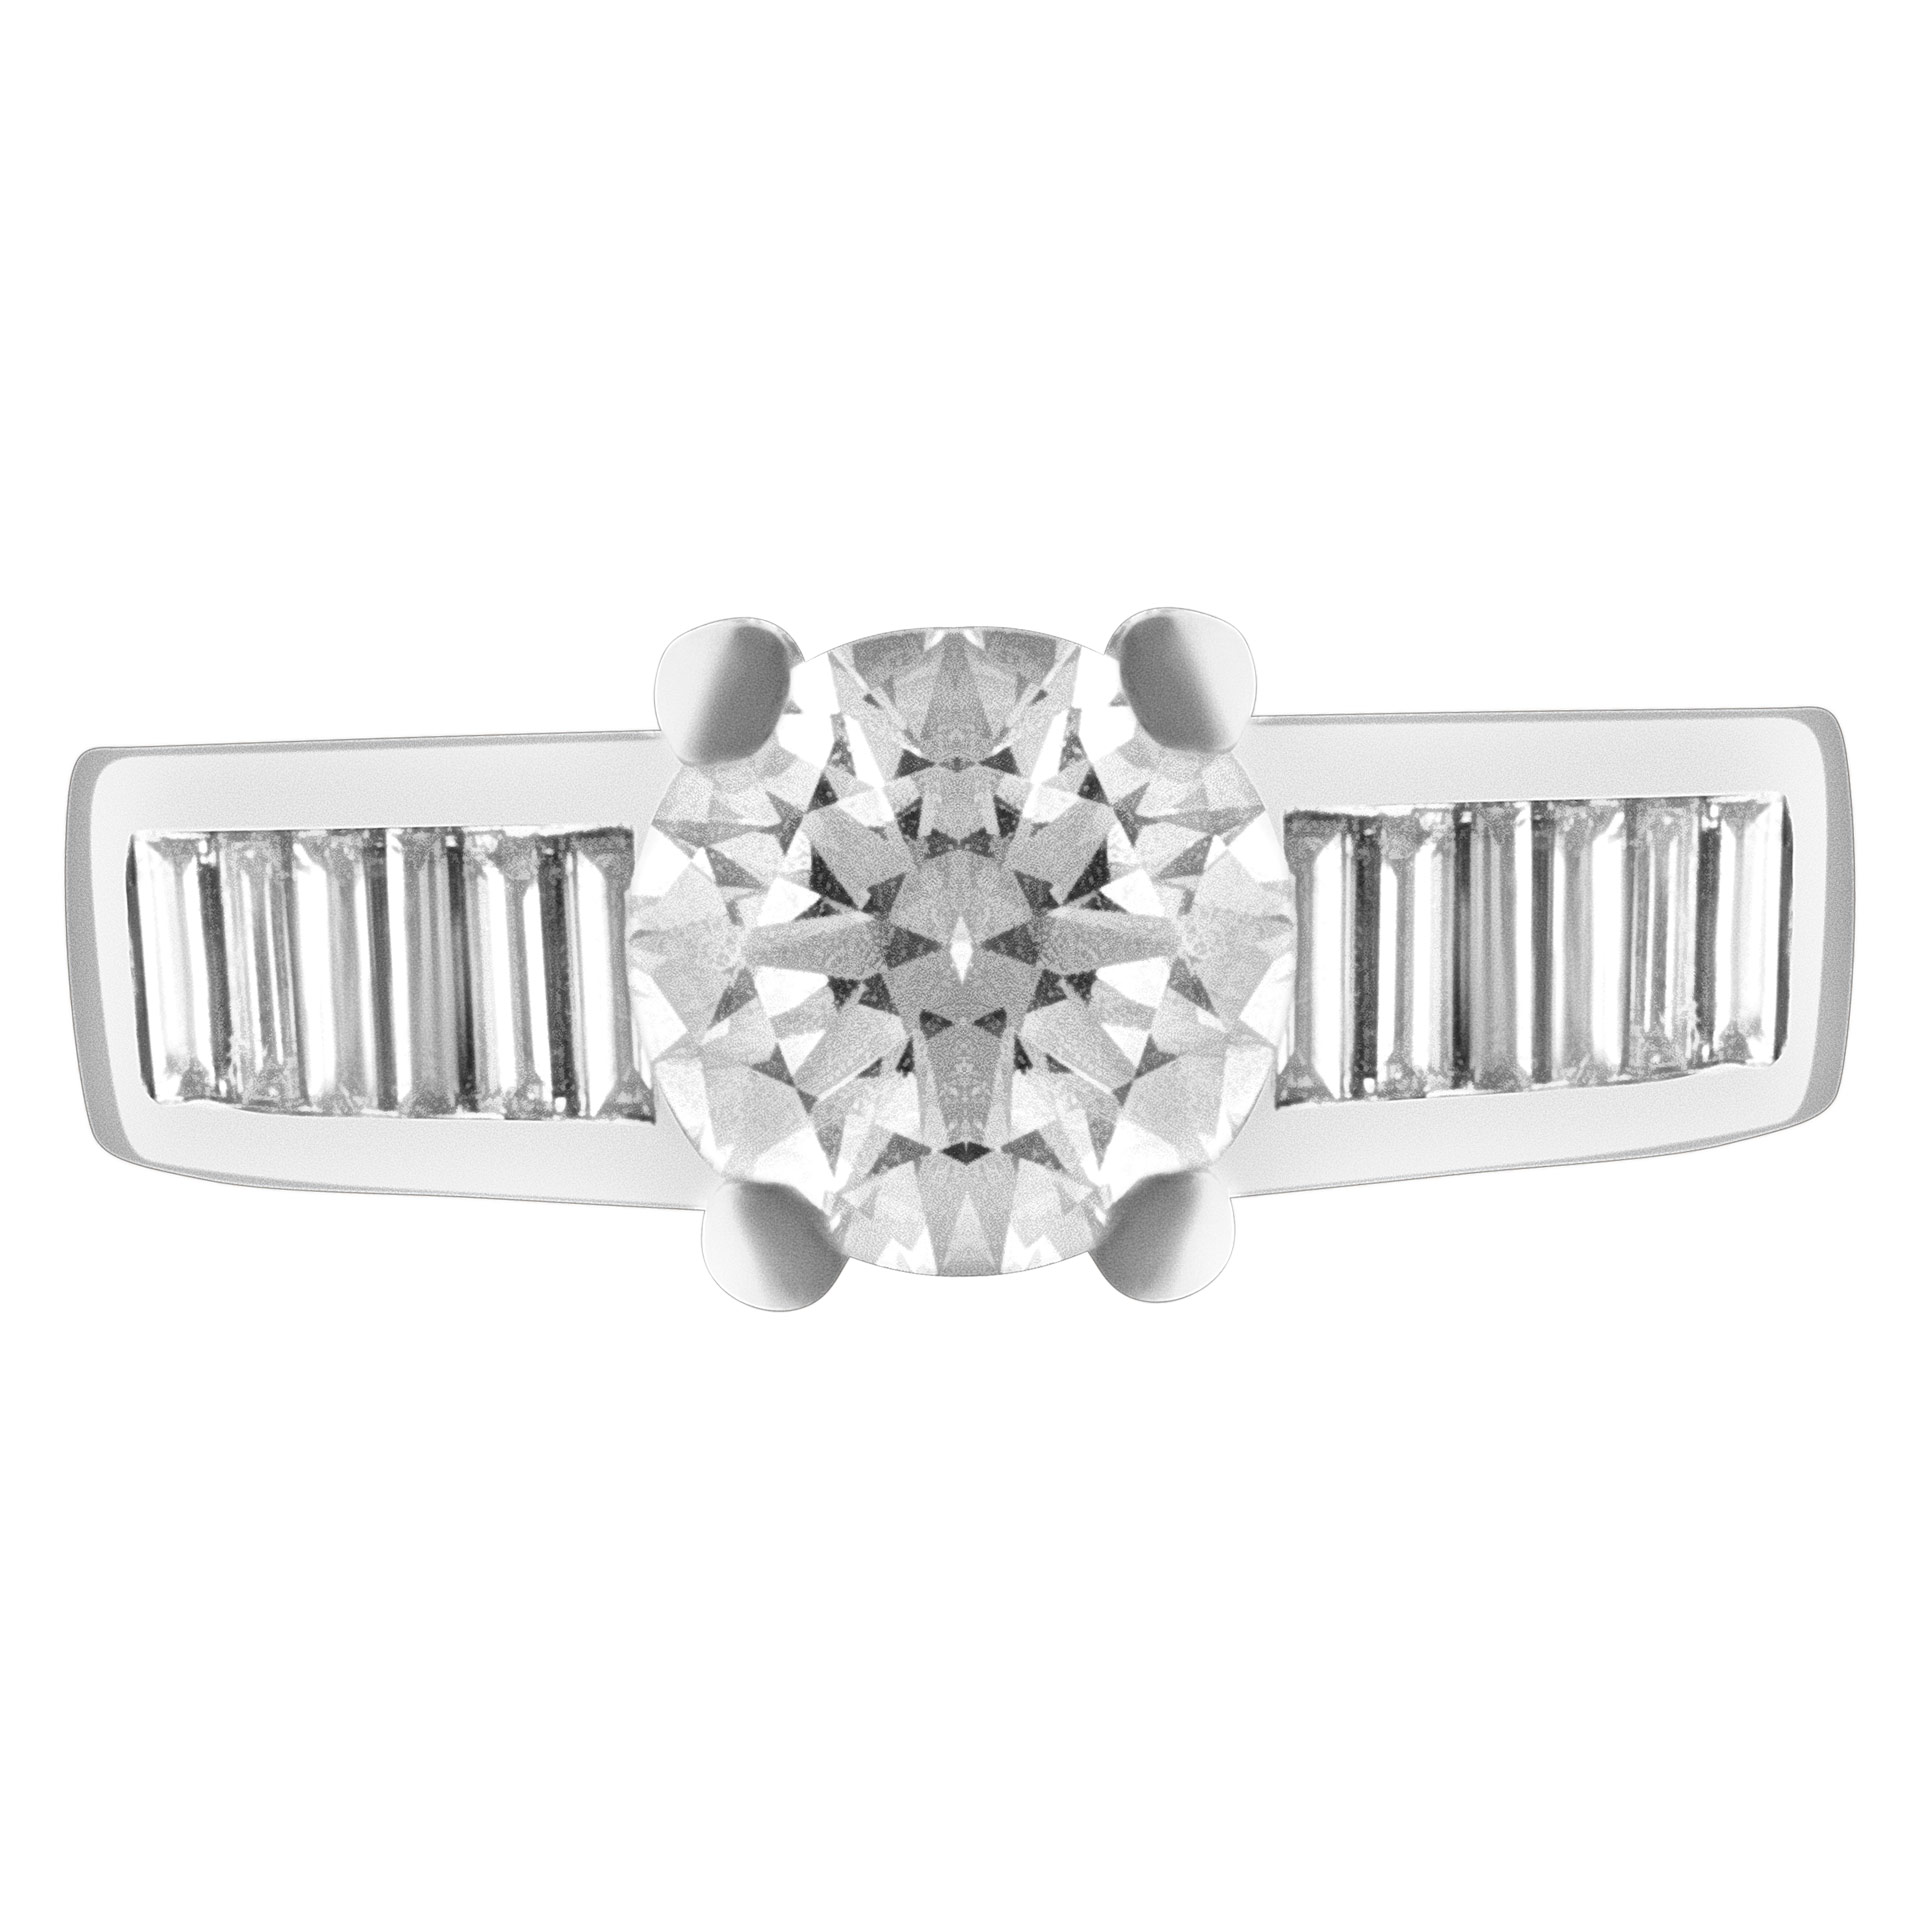 GIA certified round brilliant cut 1.14 carat D color, VS2 clarity diamond ring image 1